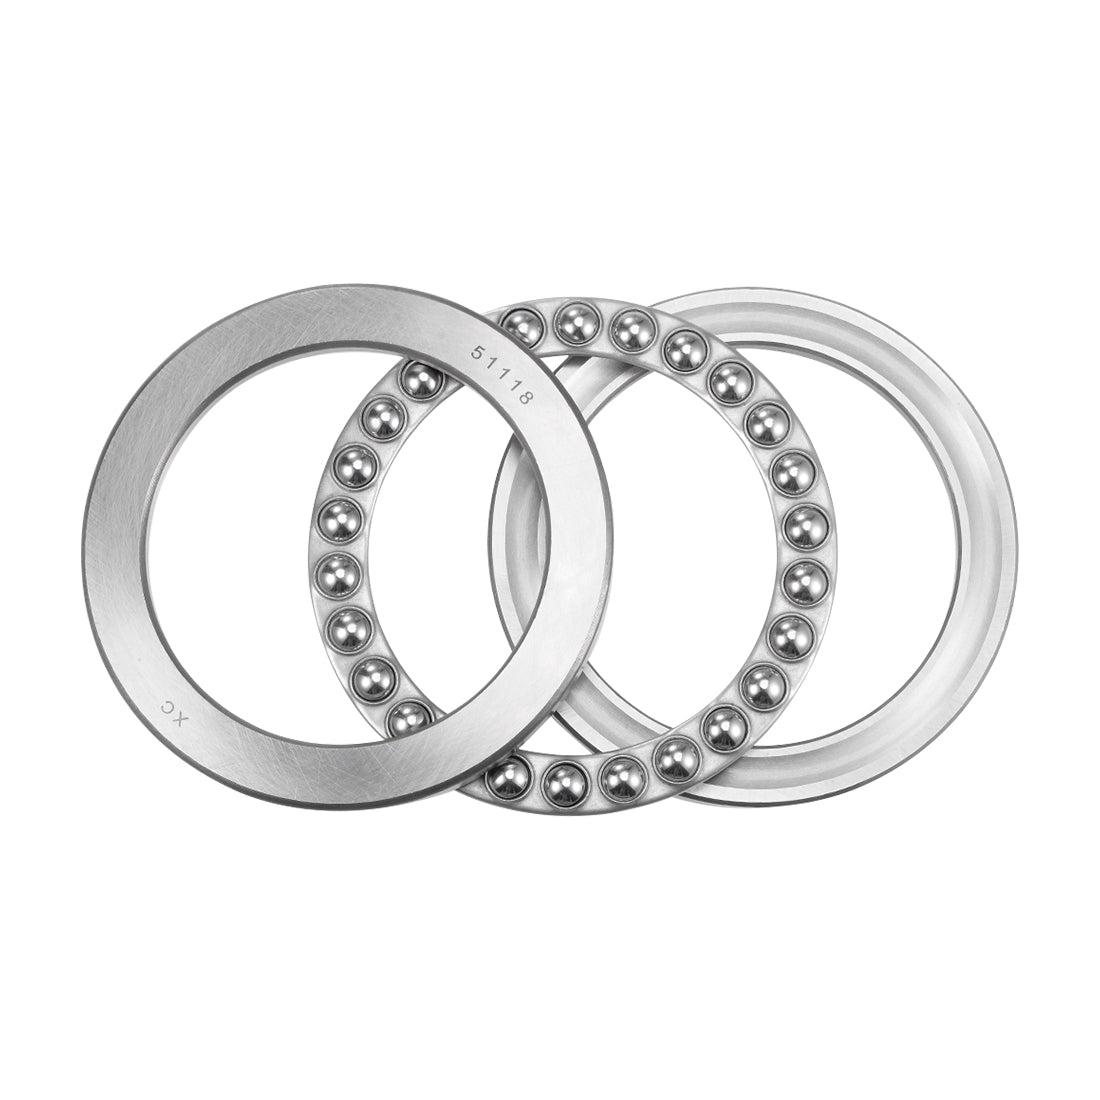 uxcell Uxcell 51118 Miniature Thrust Ball Bearing 90x120x22mm Chrome Steel with Washer